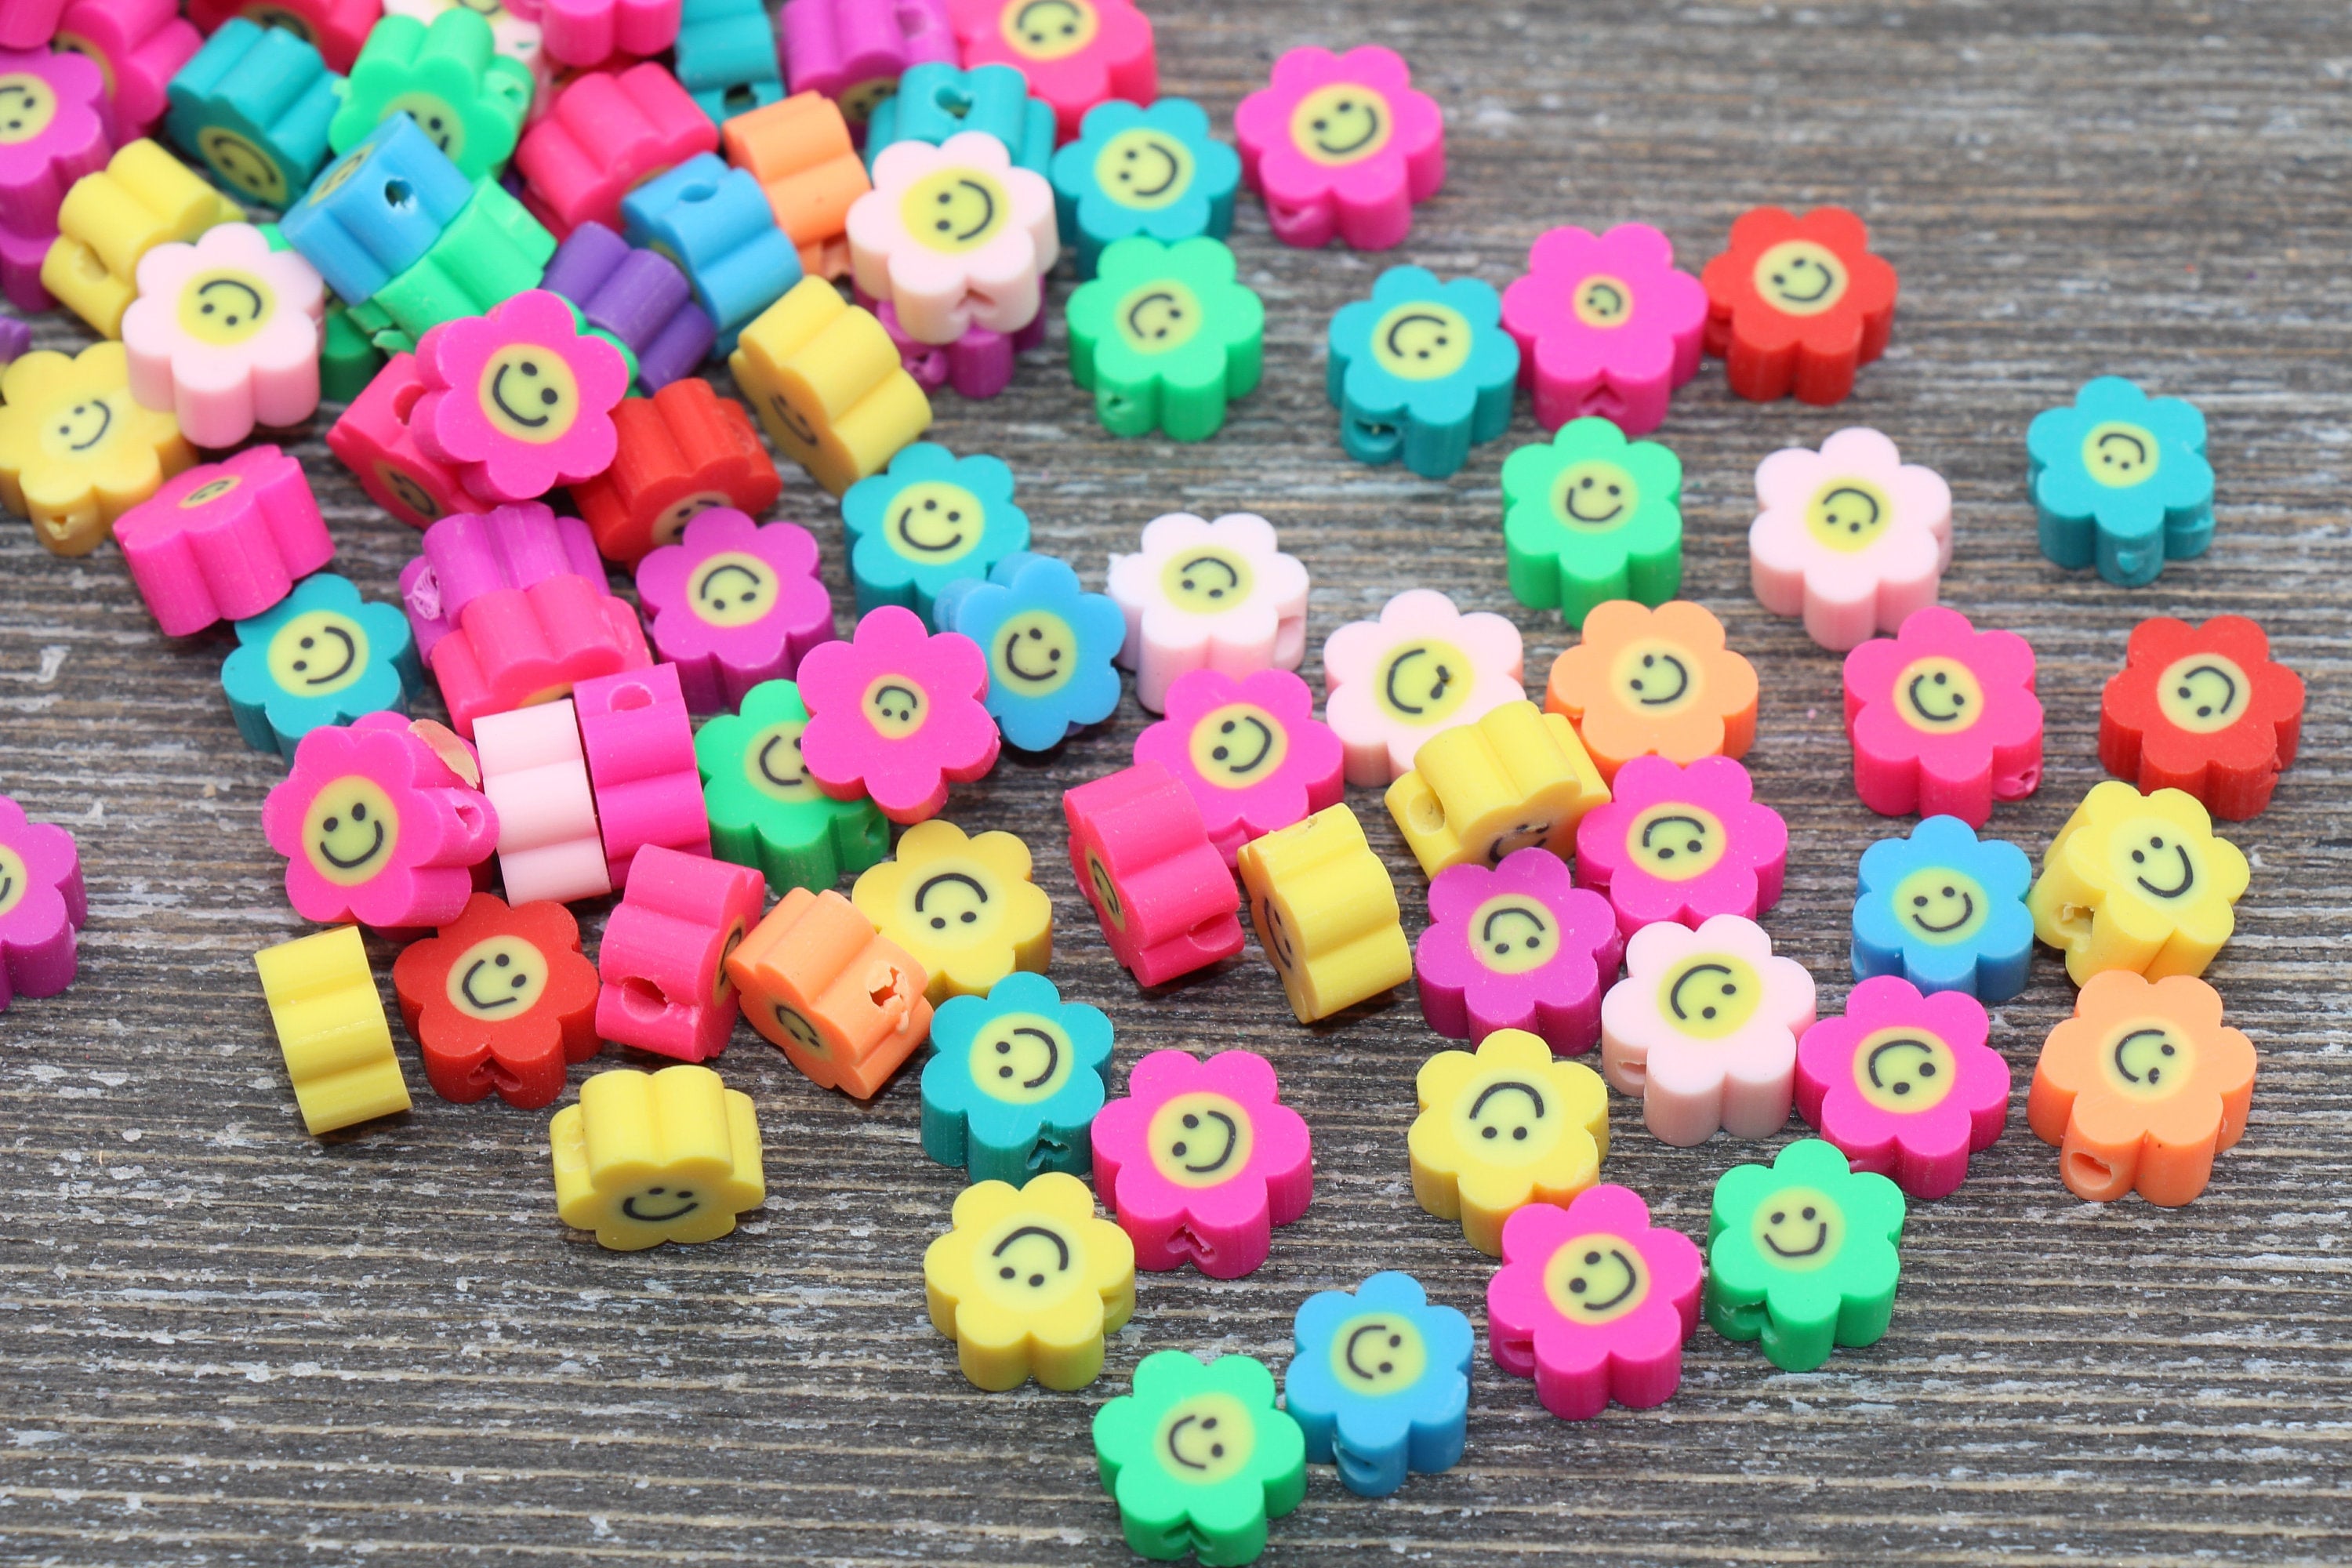 DIY 10mm 20/50/100pcs Yellow Smiling Fruit Beads Polymer Clay Beads Loose  Spacer Beads For Jewelry Making Bracelets Accessories